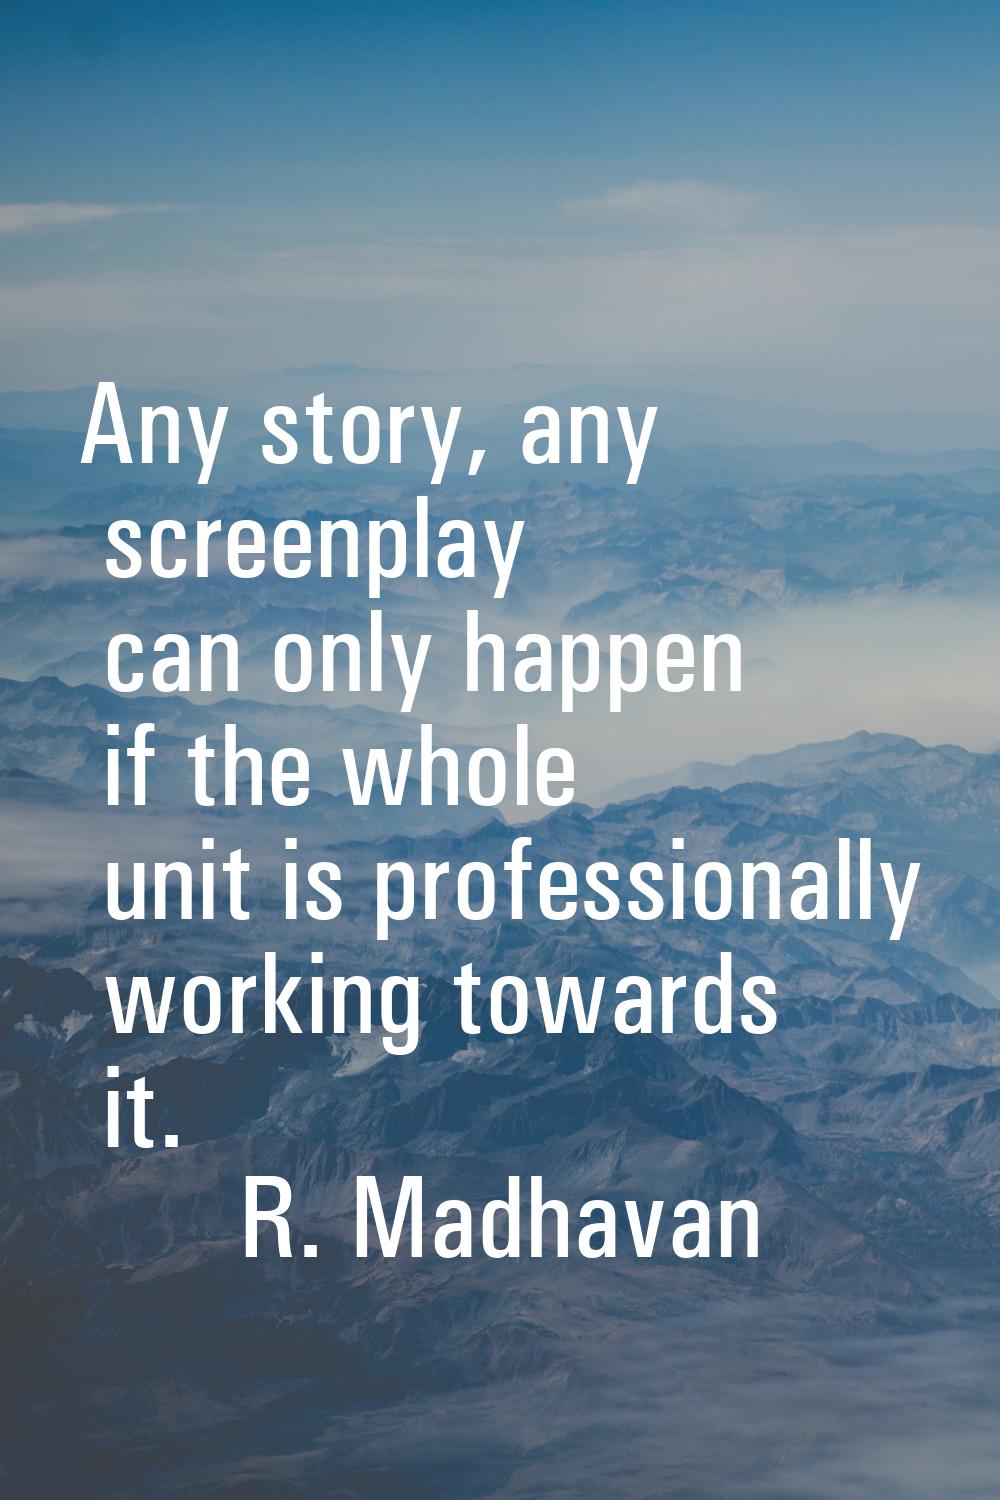 Any story, any screenplay can only happen if the whole unit is professionally working towards it.